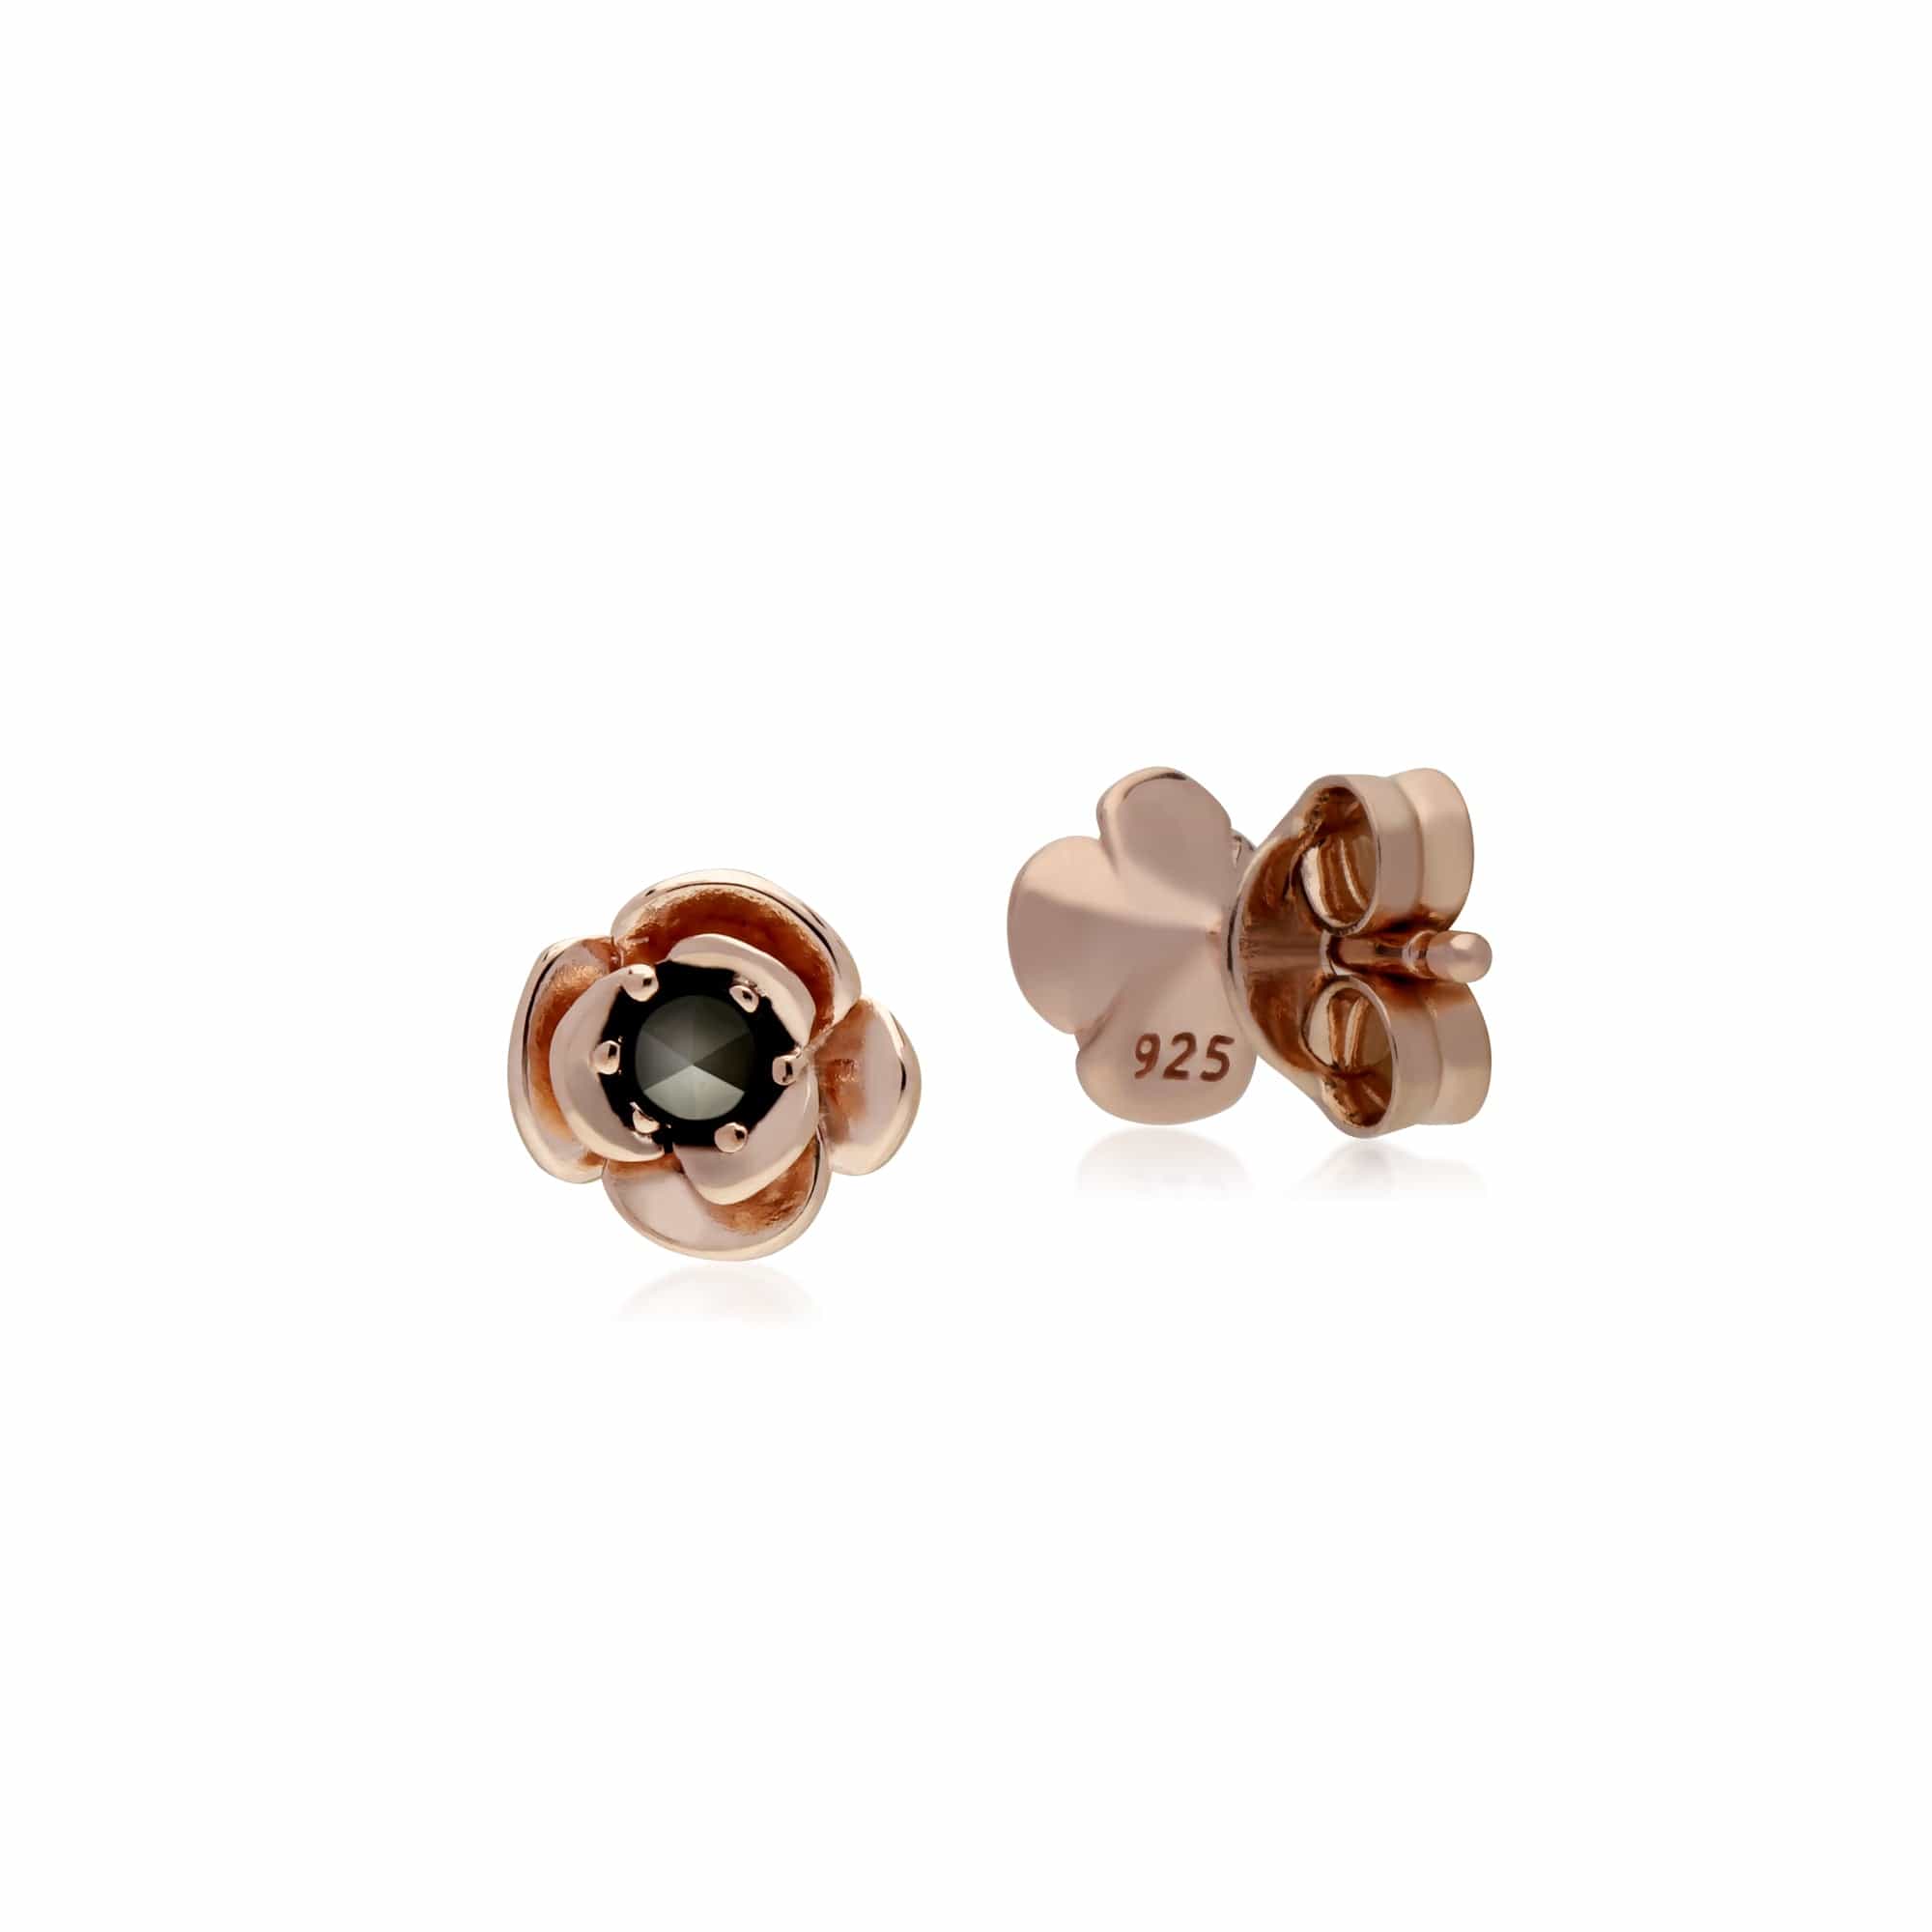 224E022901925 Rose Gold Plated Round Marcasite Floral Stud Earrings in 925 Sterling Silver 2